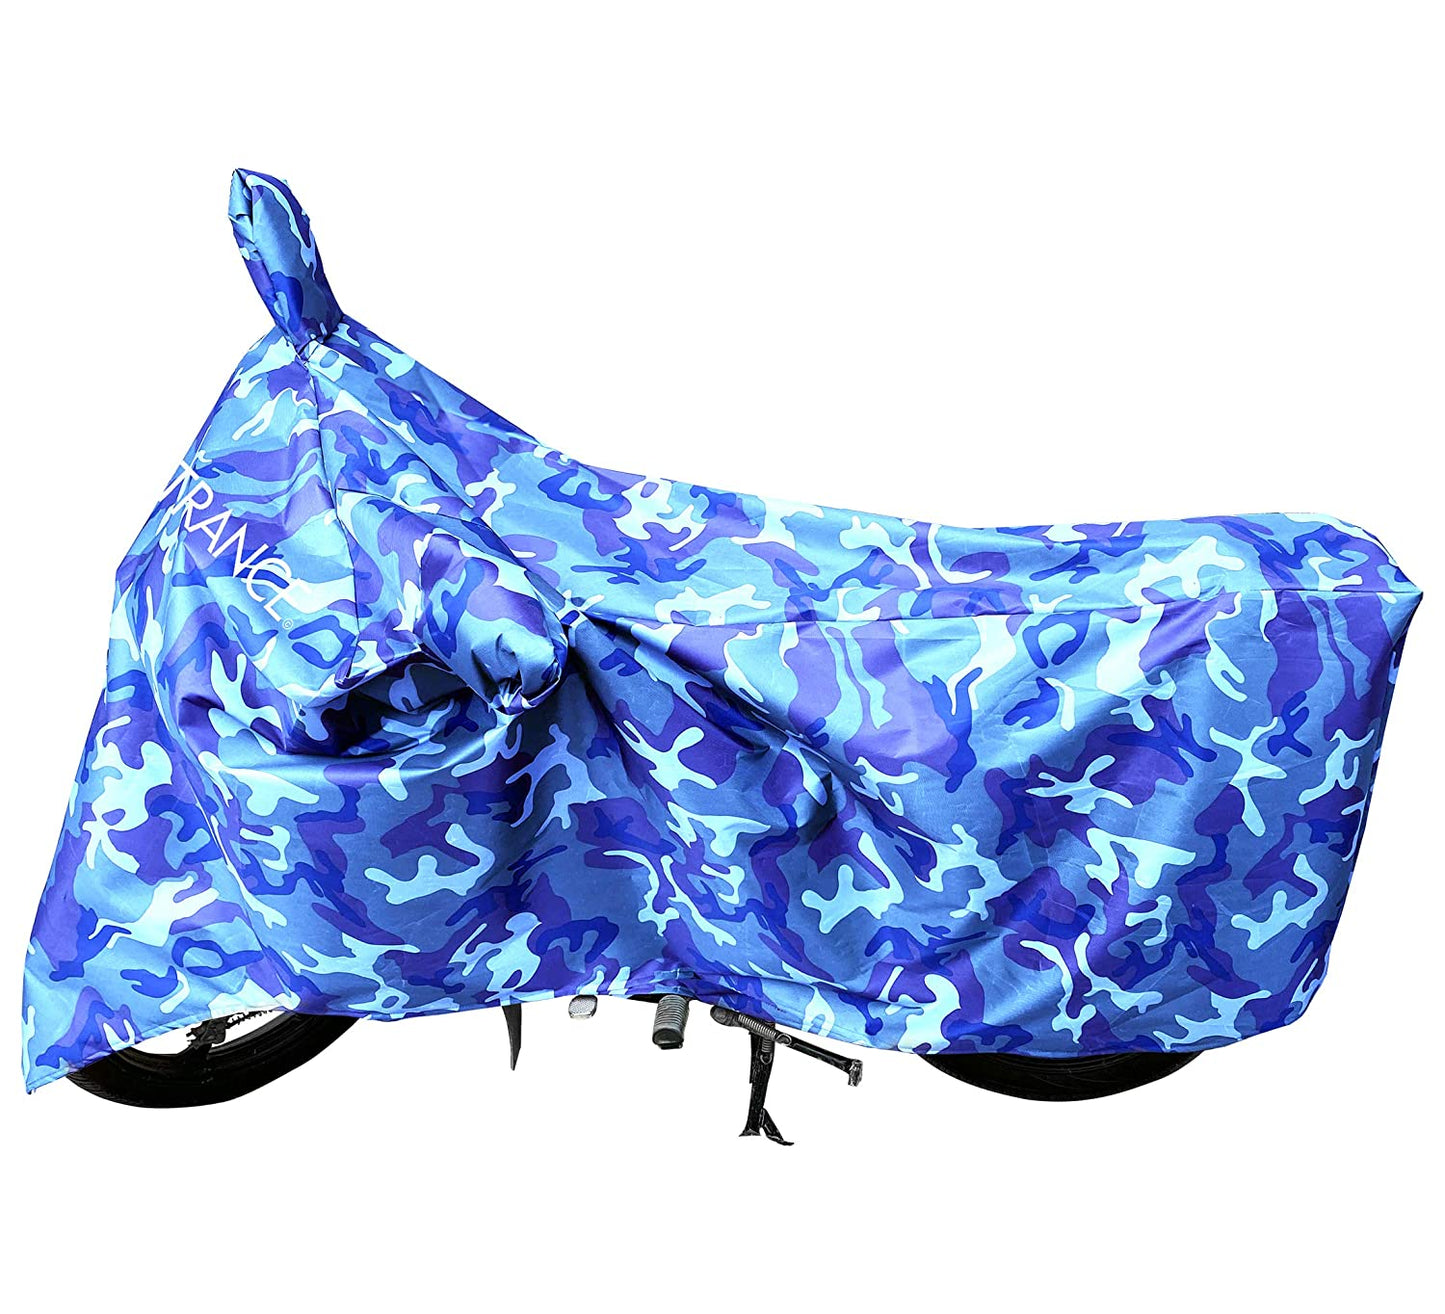 MotoTrance Jungle Bike Body Covers For Yamaha YZF R1 - Interlock-Stitched Waterproof and Heat Resistant with Mirror Pockets